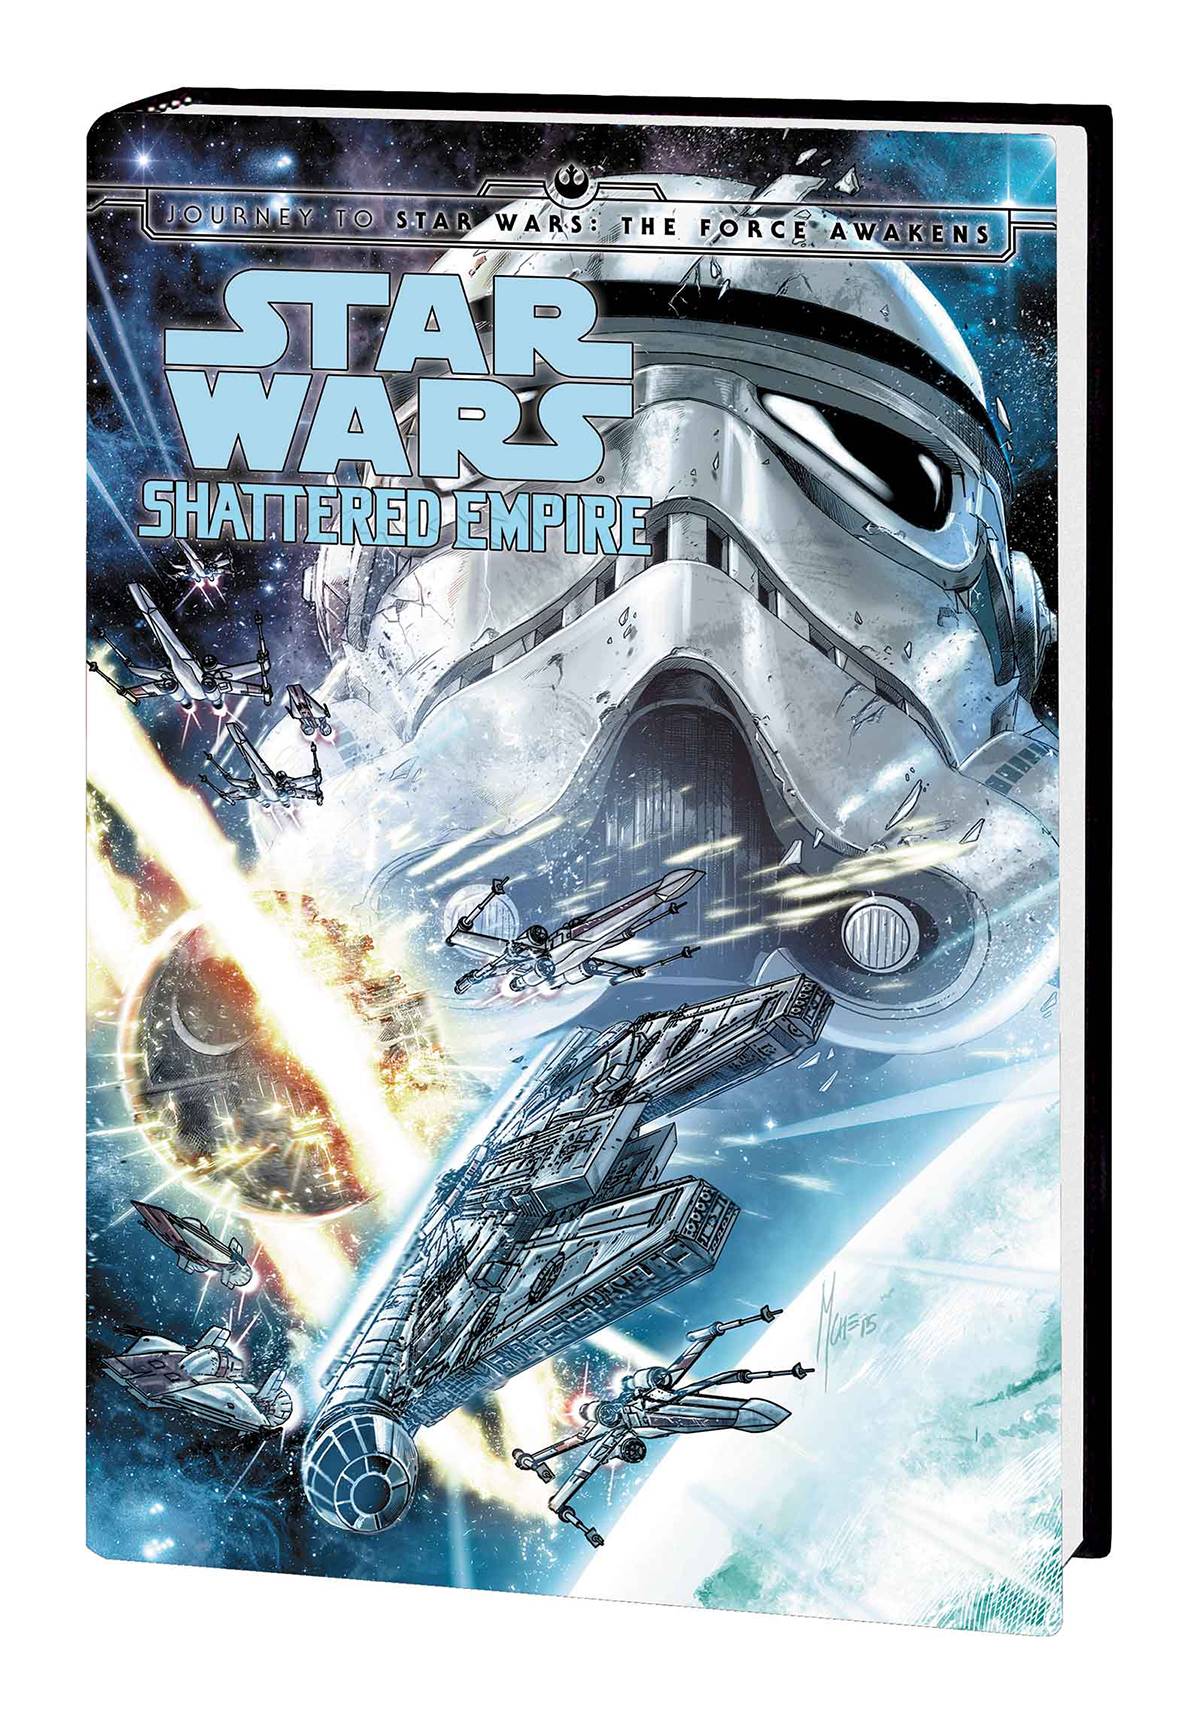 Journey to Star Wars: The Force Awakens Shattered Empire HC